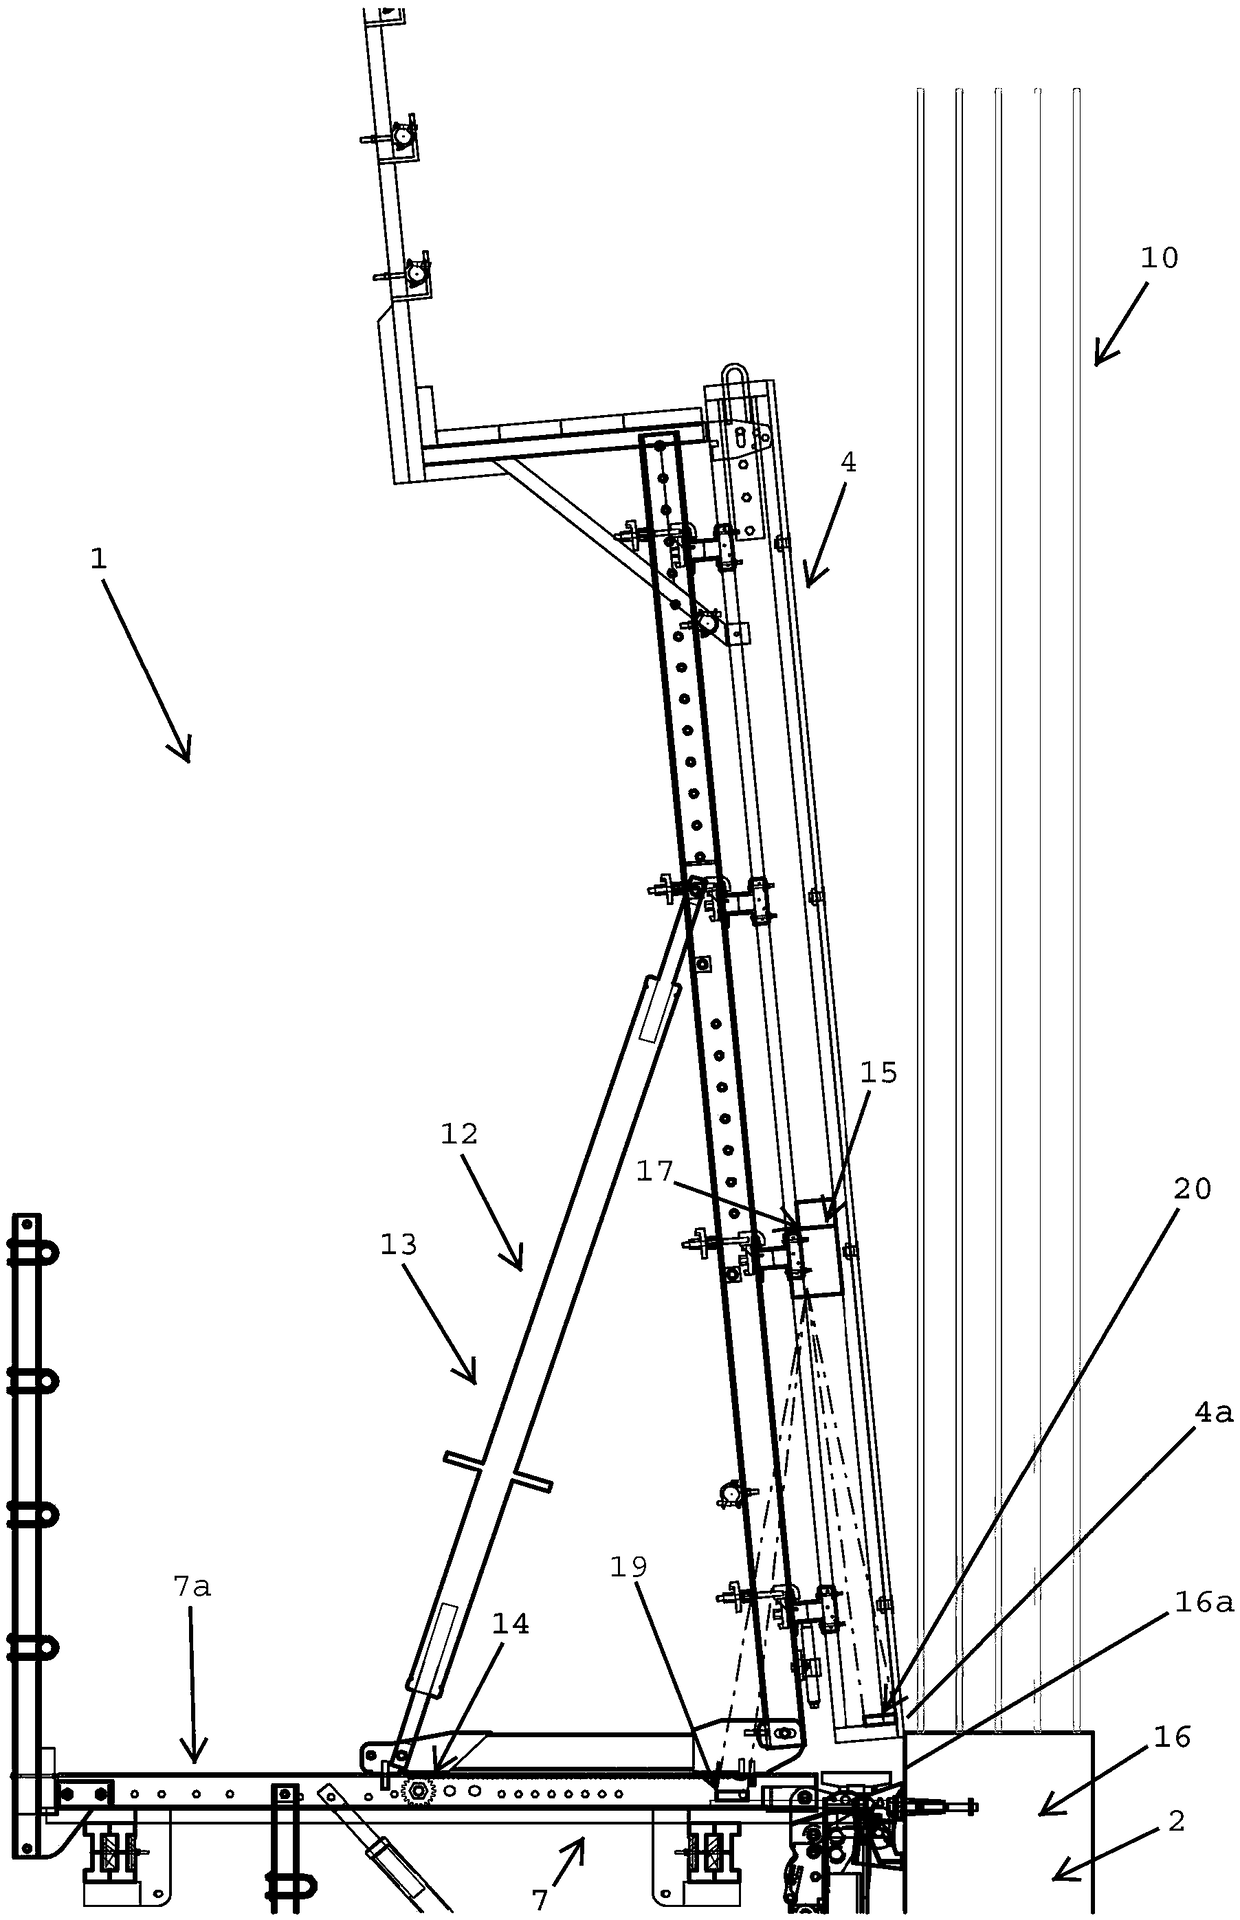 Climbing formwork and method for erection of a concrete structure